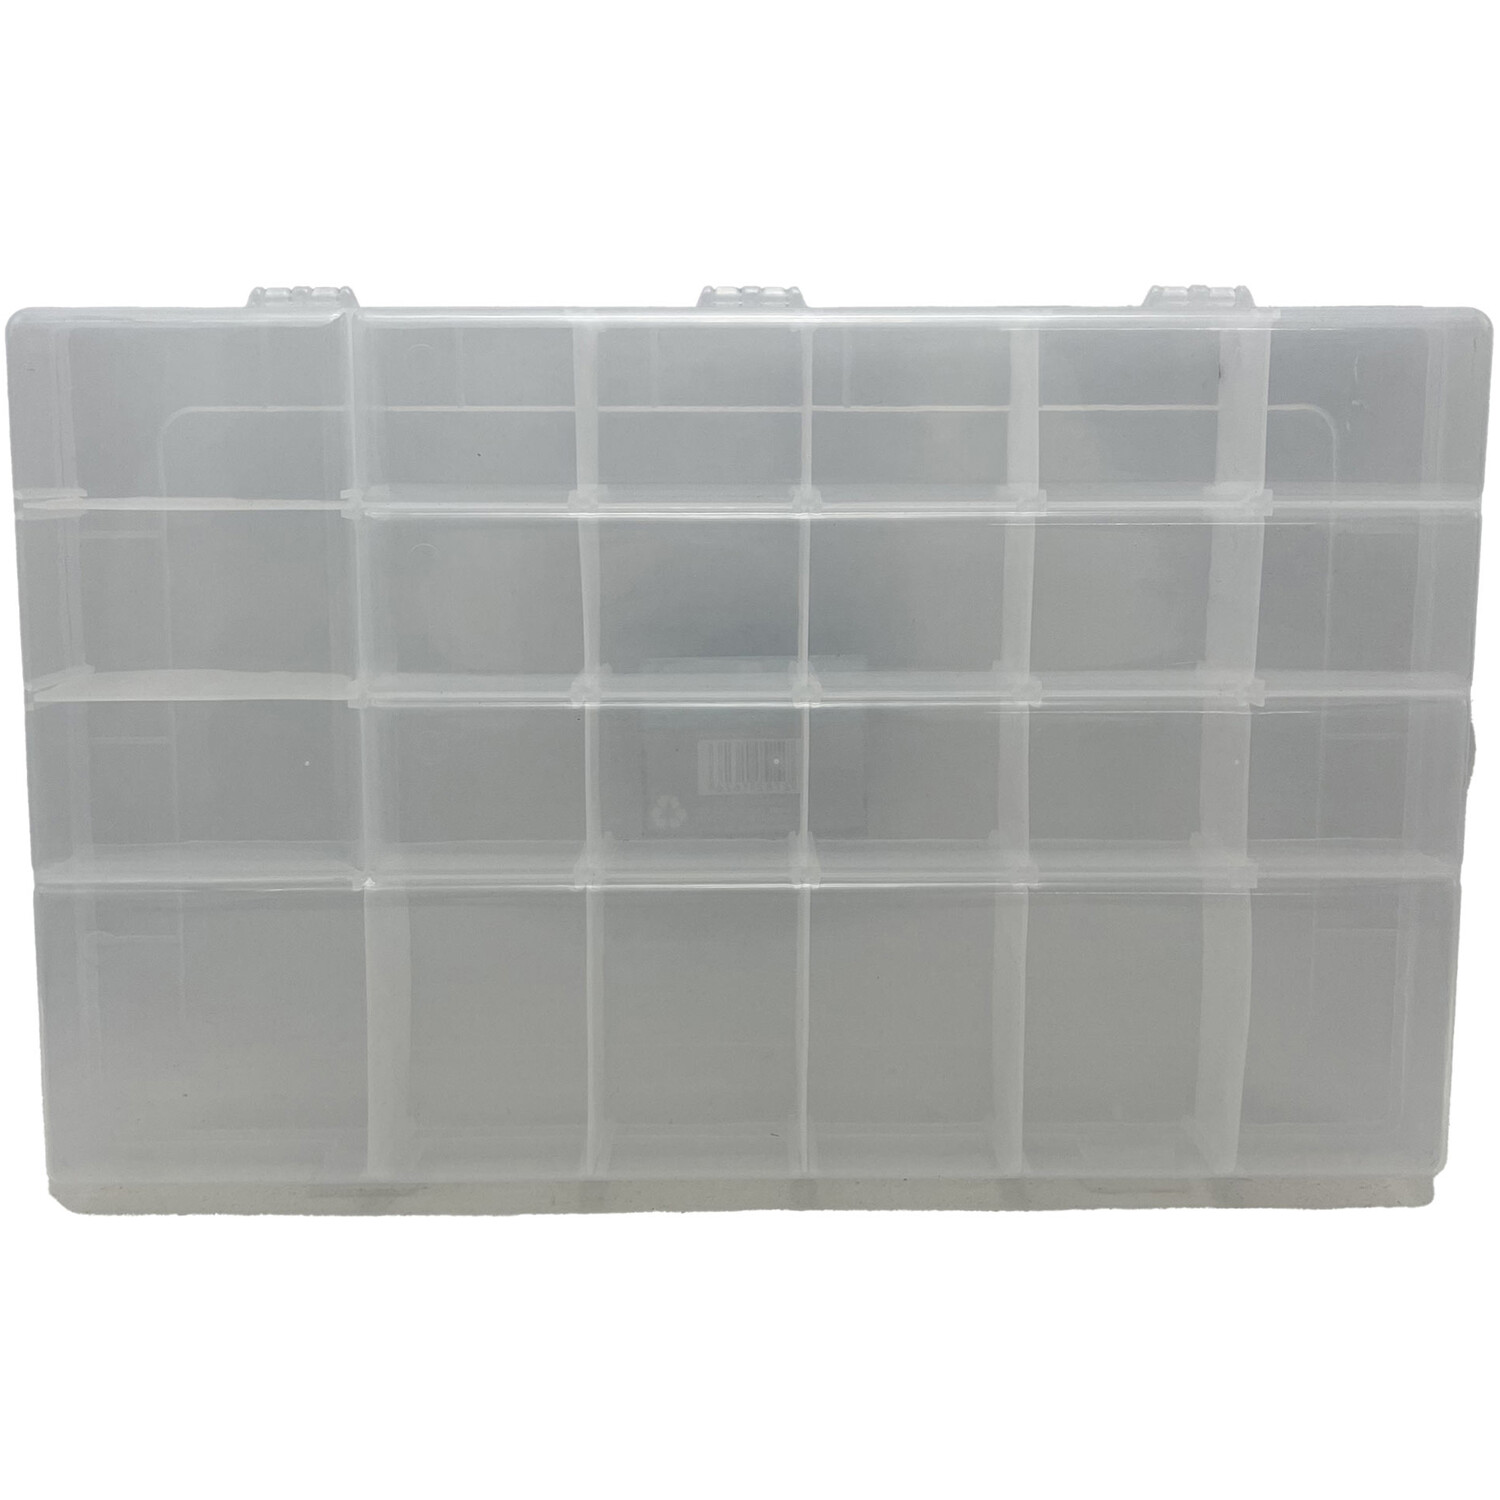 i-doodle 24 Compartment Large Clear Storage Box Image 2